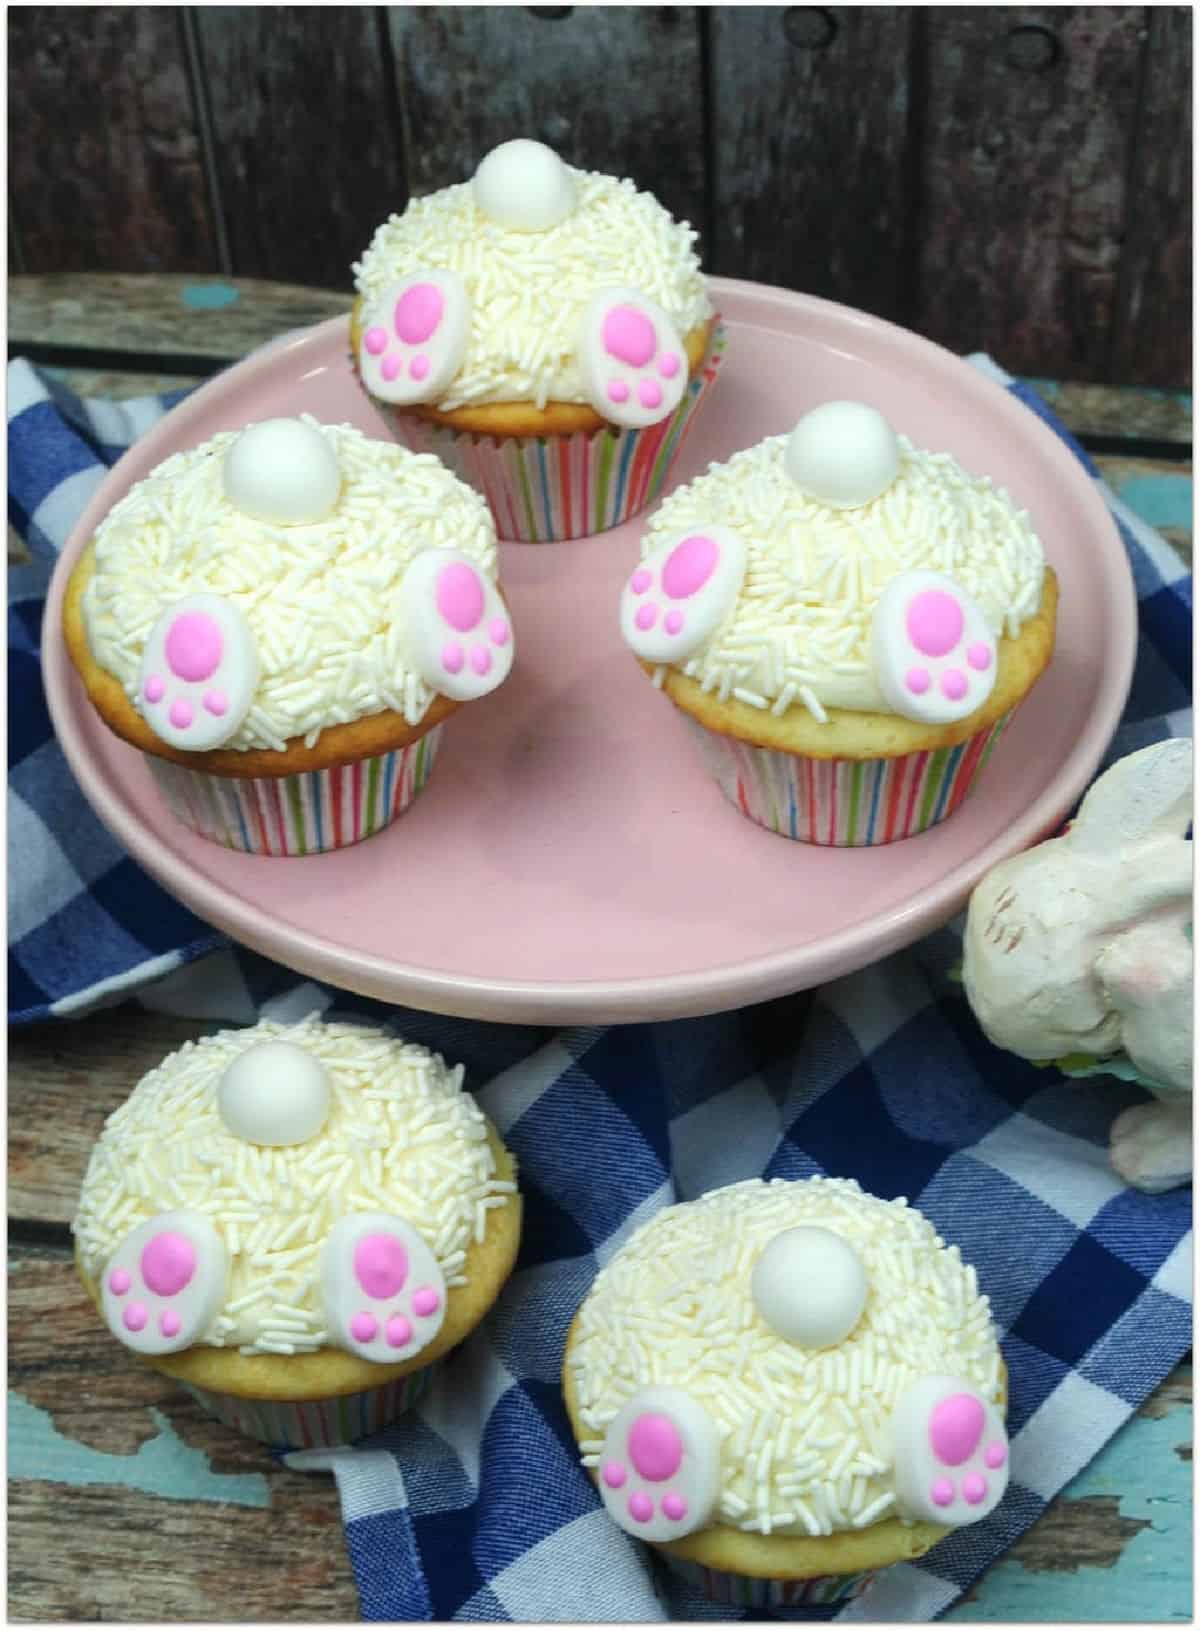 Bunny butt cupcakes on a blue wood board with blue and white checked cloth.